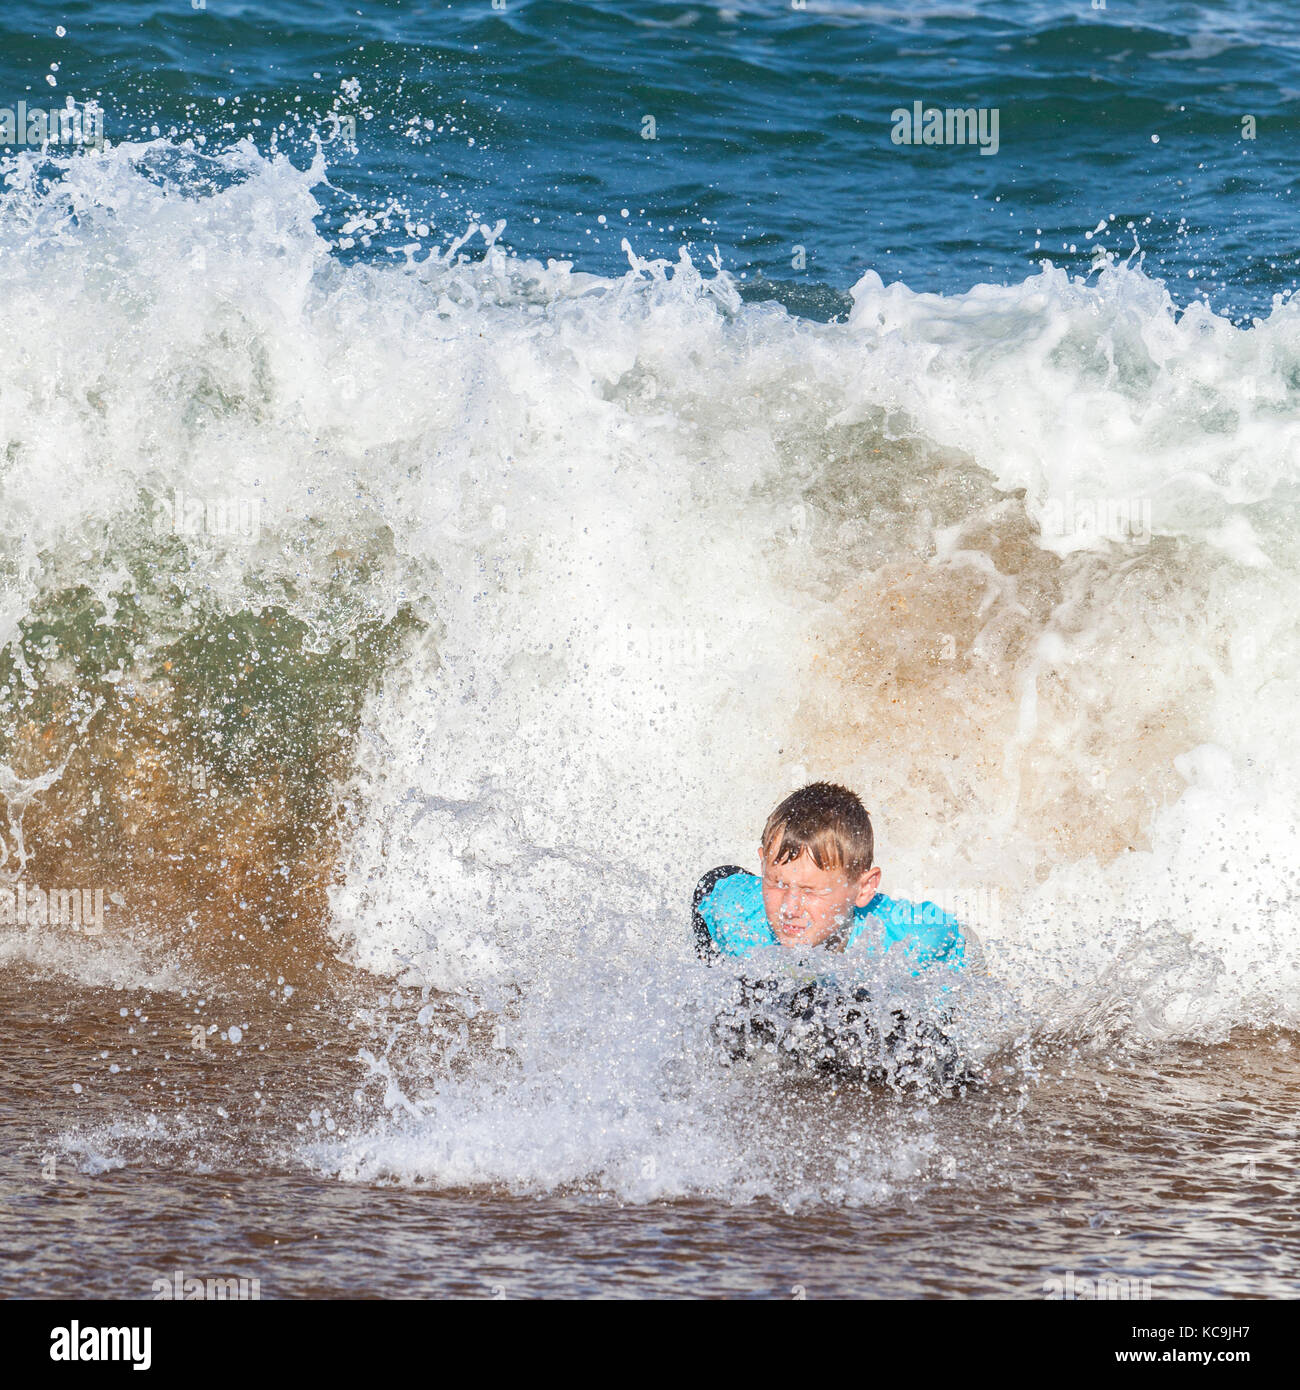 Avon, Outer Banks, North Carolina, USA.  Pre-teenage Boy in the Atlantic Surf on his Boogie Board. Stock Photo